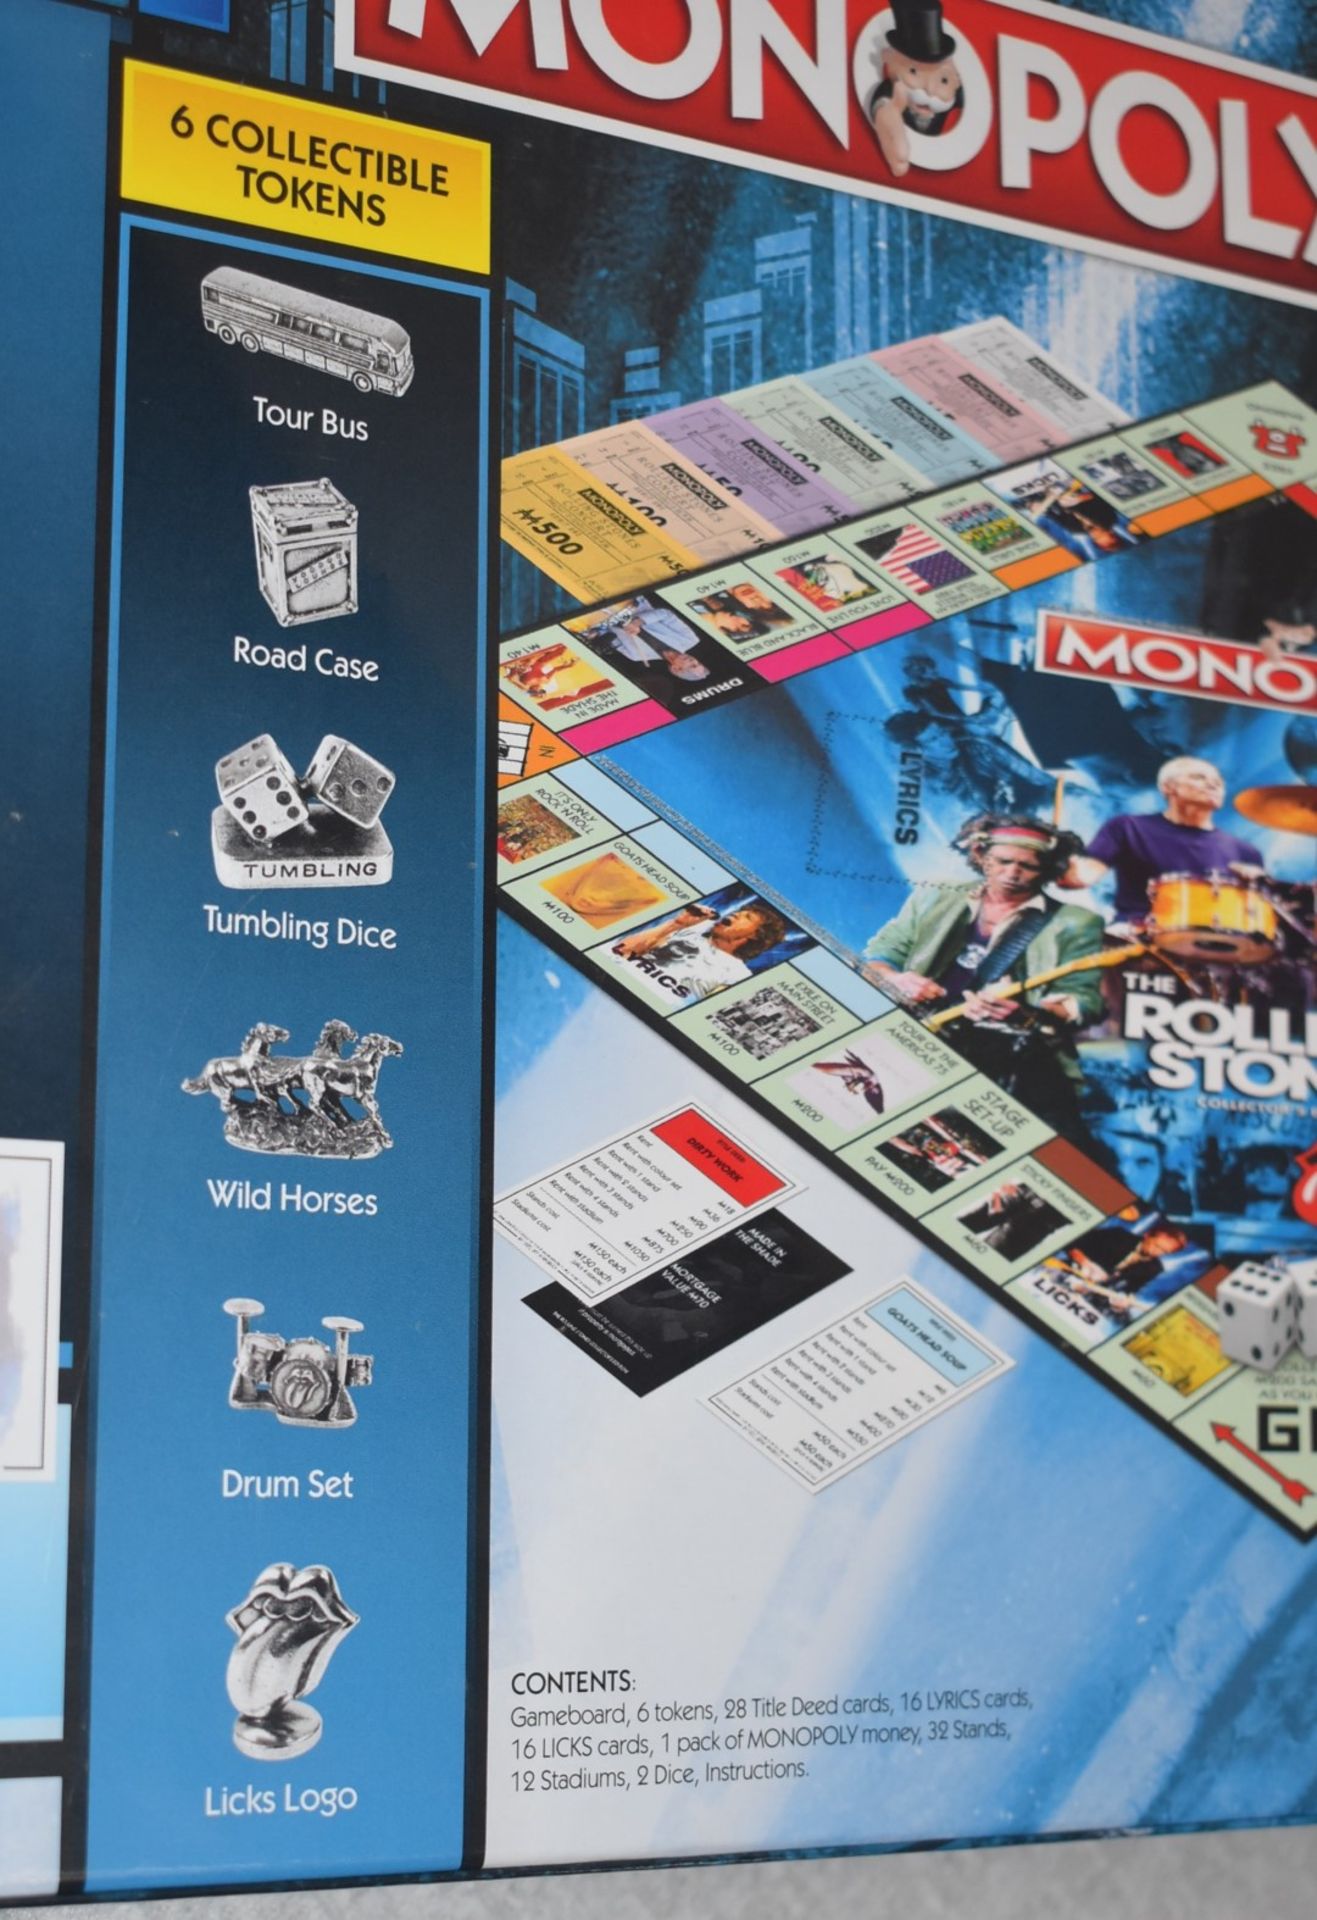 1 x MONOPOLY Collectors Edition ROLLING STONES Board Game - New and Sealed - CL720 - Ref: CA - - Image 2 of 3